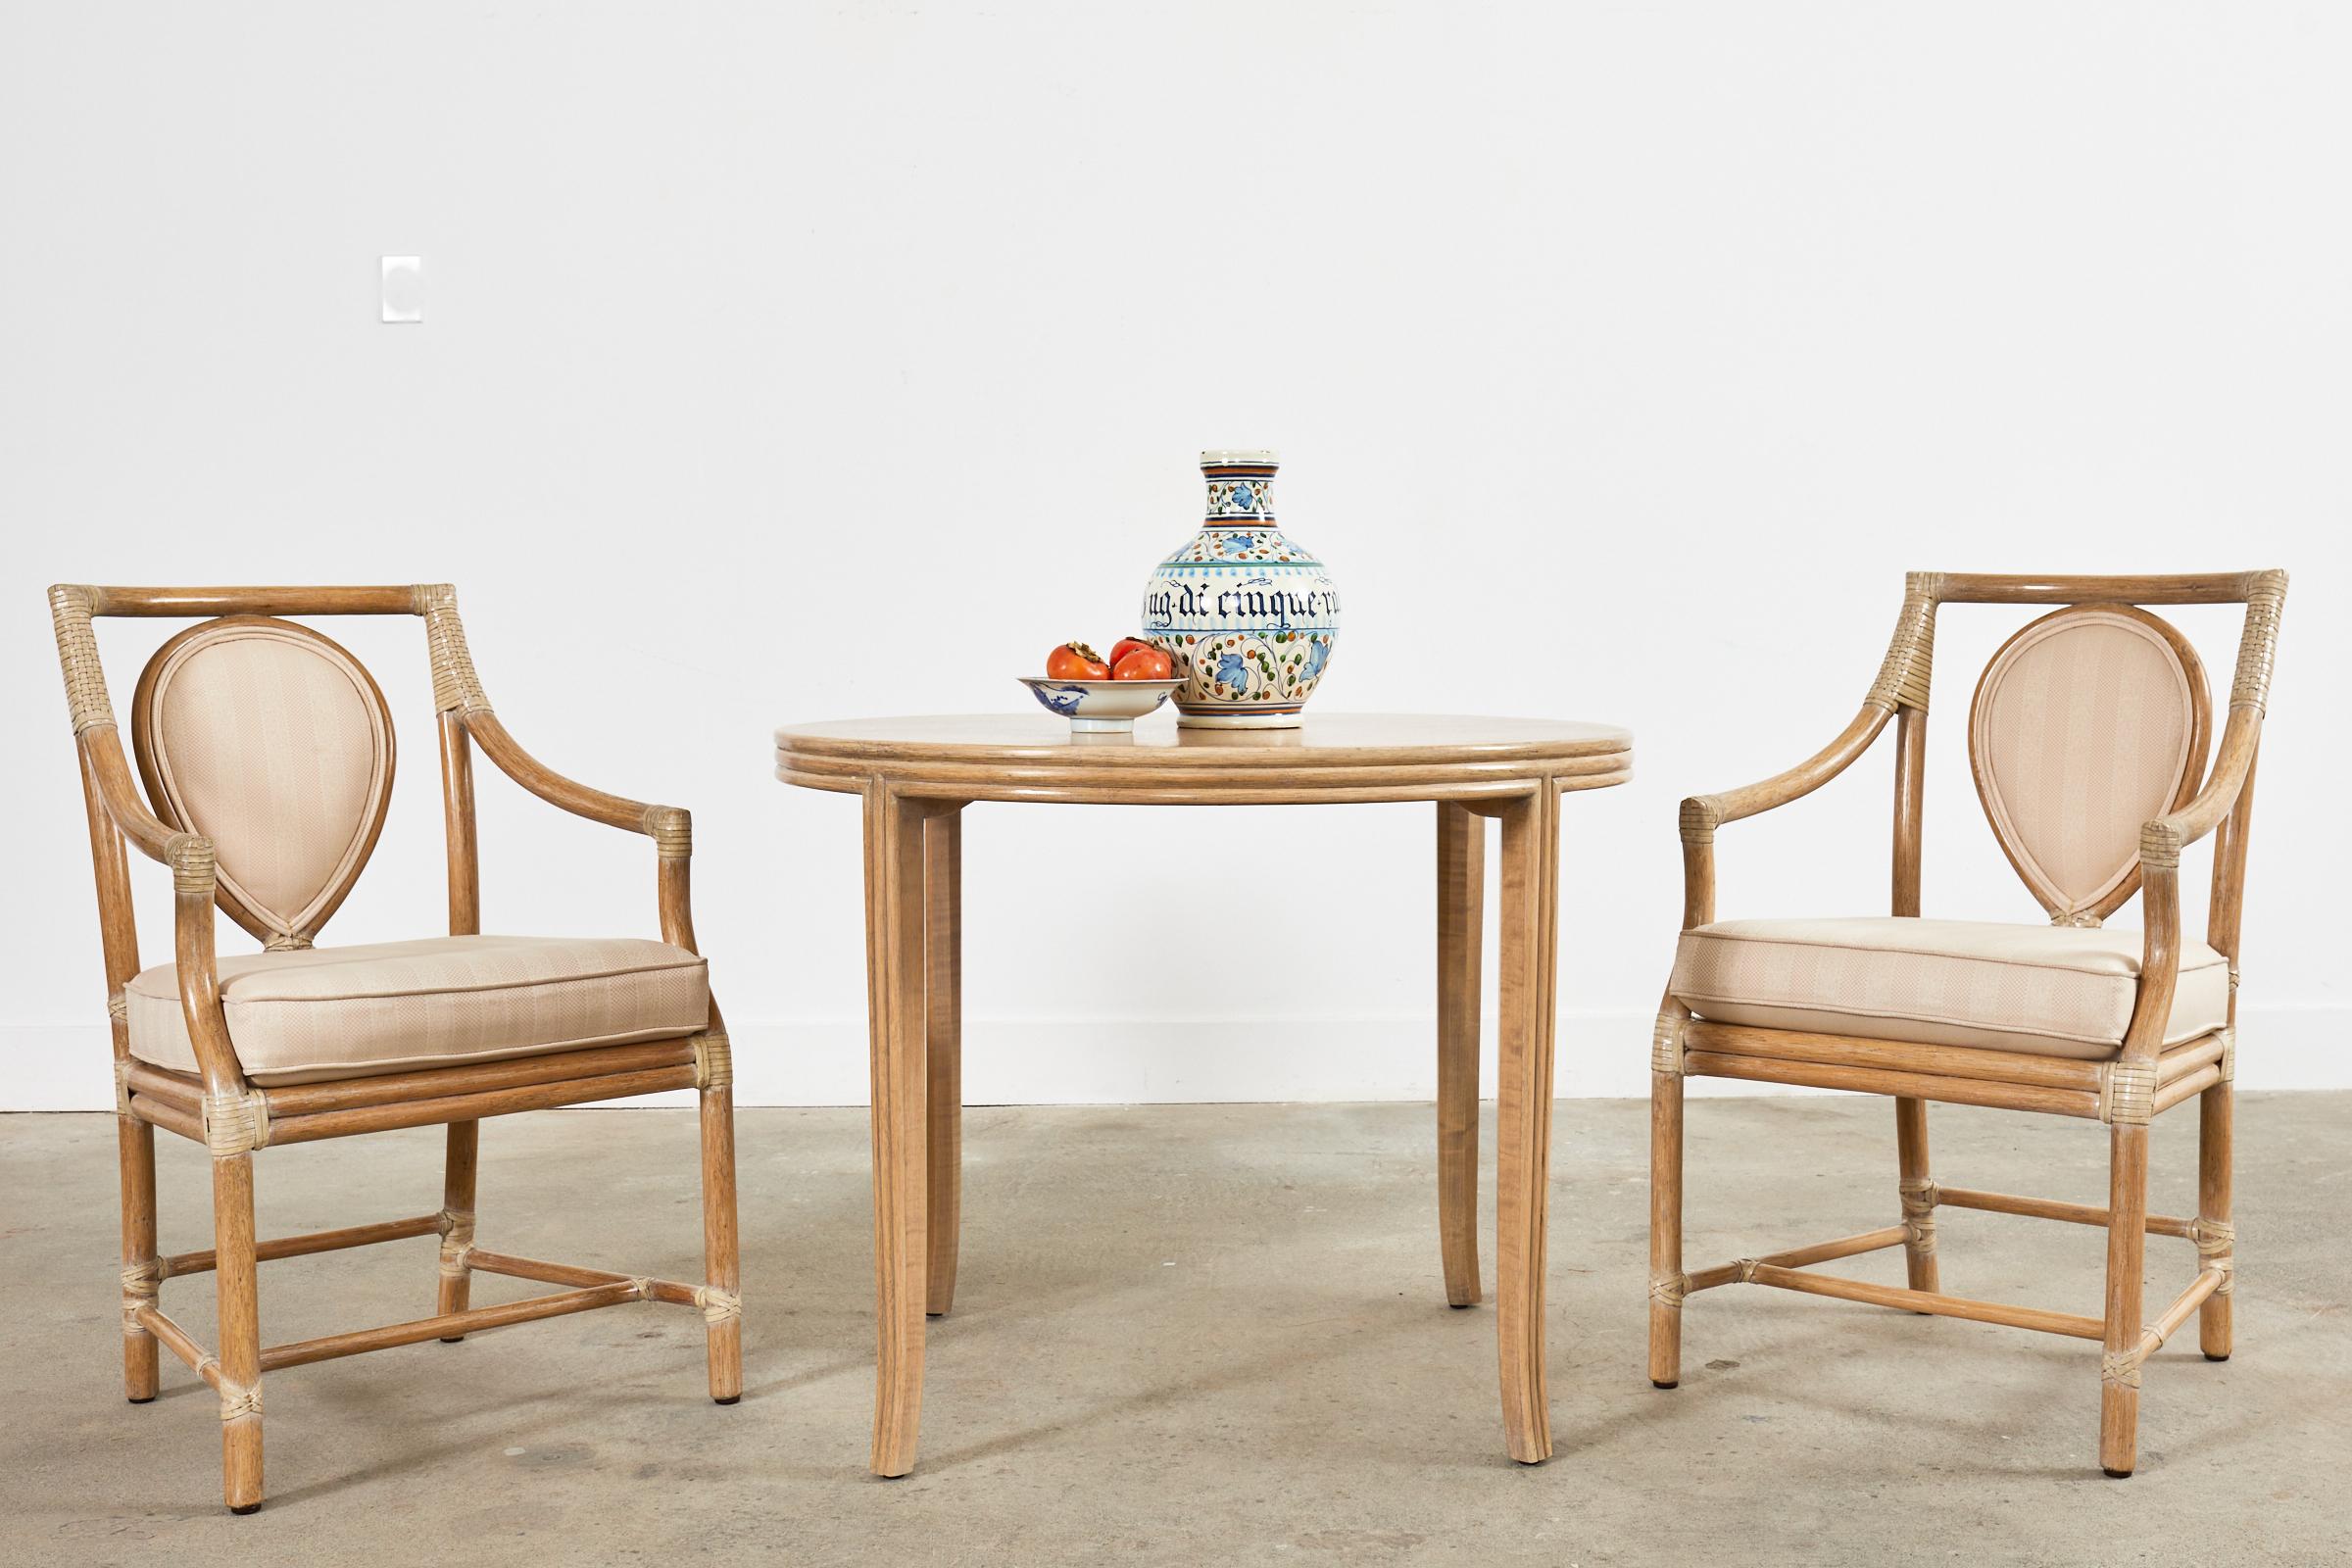 Elegant set of three McGuire rattan loop back dining armchairs made in the California coastal organic modern style. One of McGuire's most iconic and beautiful chair styles designed by Elinor McGuire in the 1970s. The chairs feature a sinuous loop